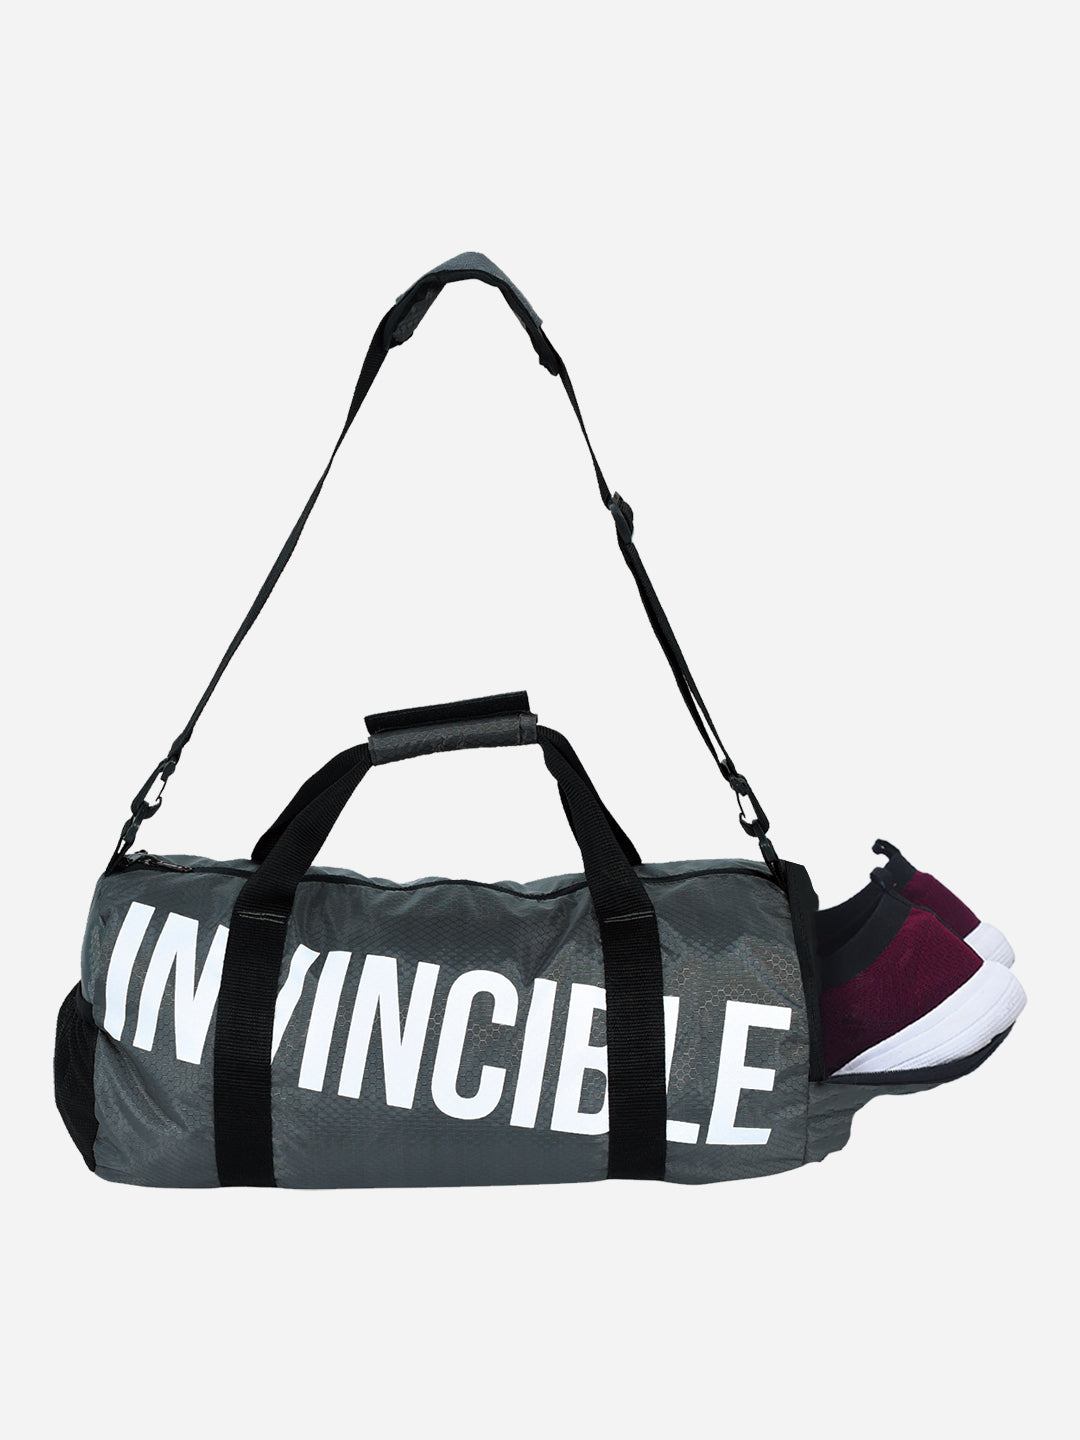 Invincible Classic Duffel Gym Bag, 27 Ltrs Unisex Shoulder Sports Bag with Extra Shoe Compartment